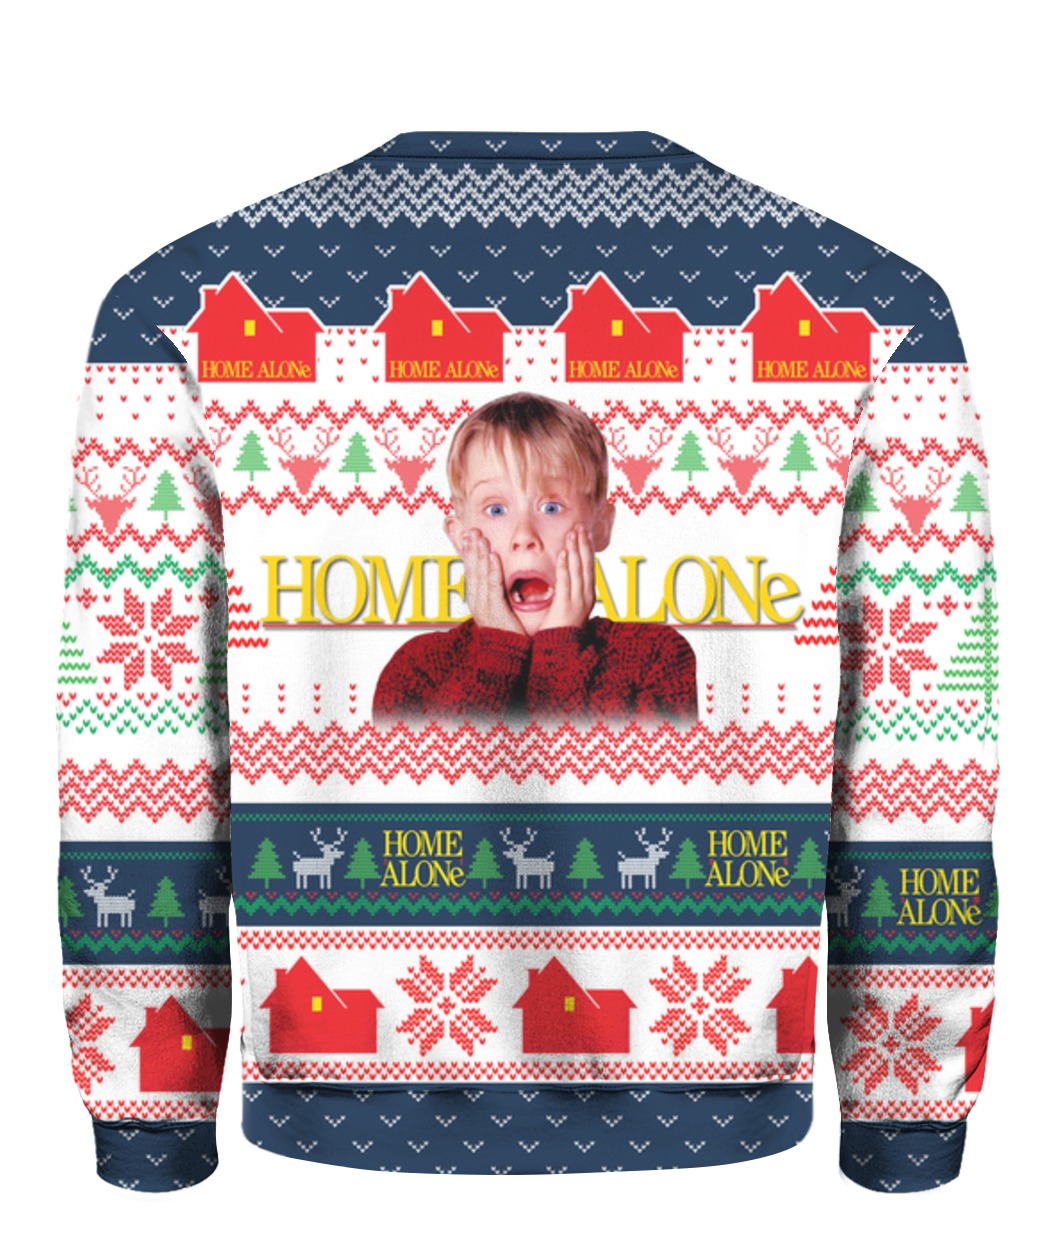 Home alone full printing ugly christmas sweater 1